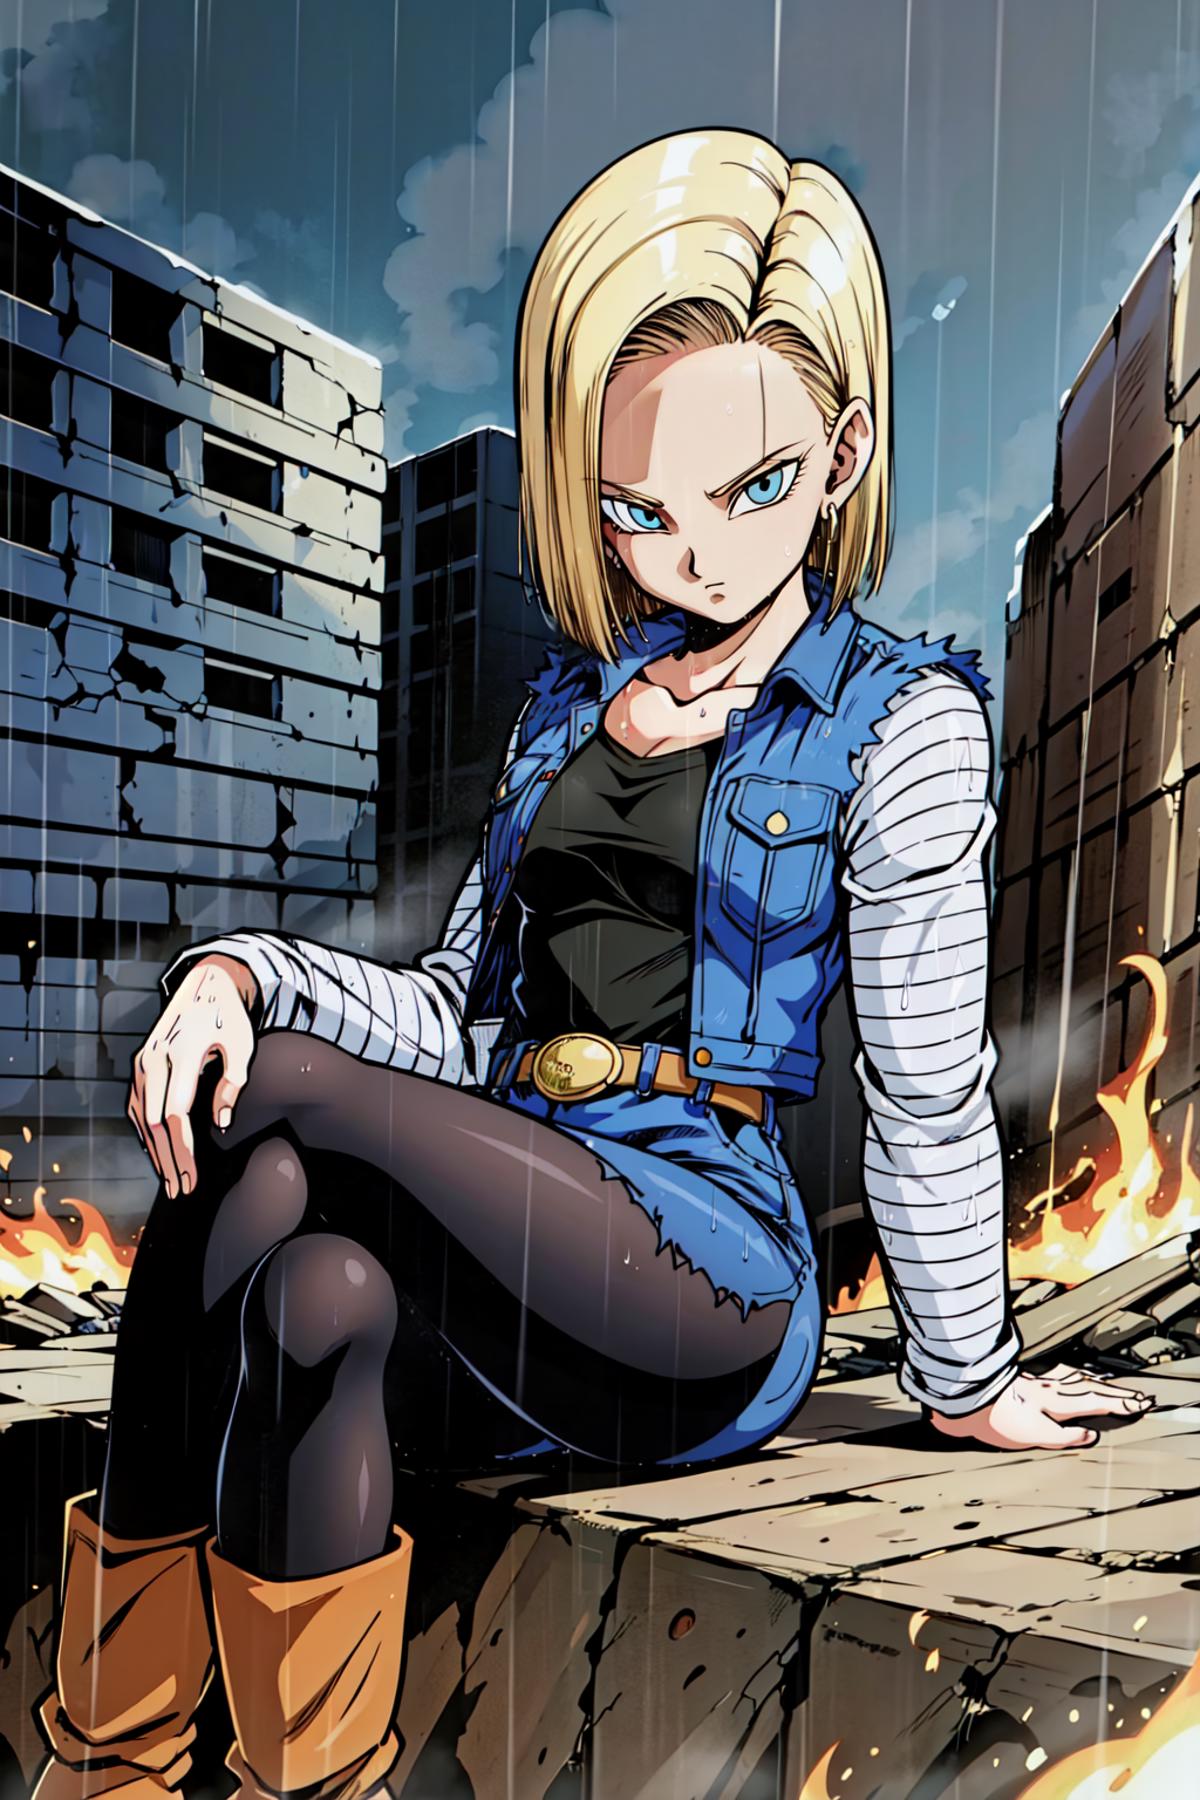 Android 18 - Dragon Ball Z image by HerschelLeVerrier